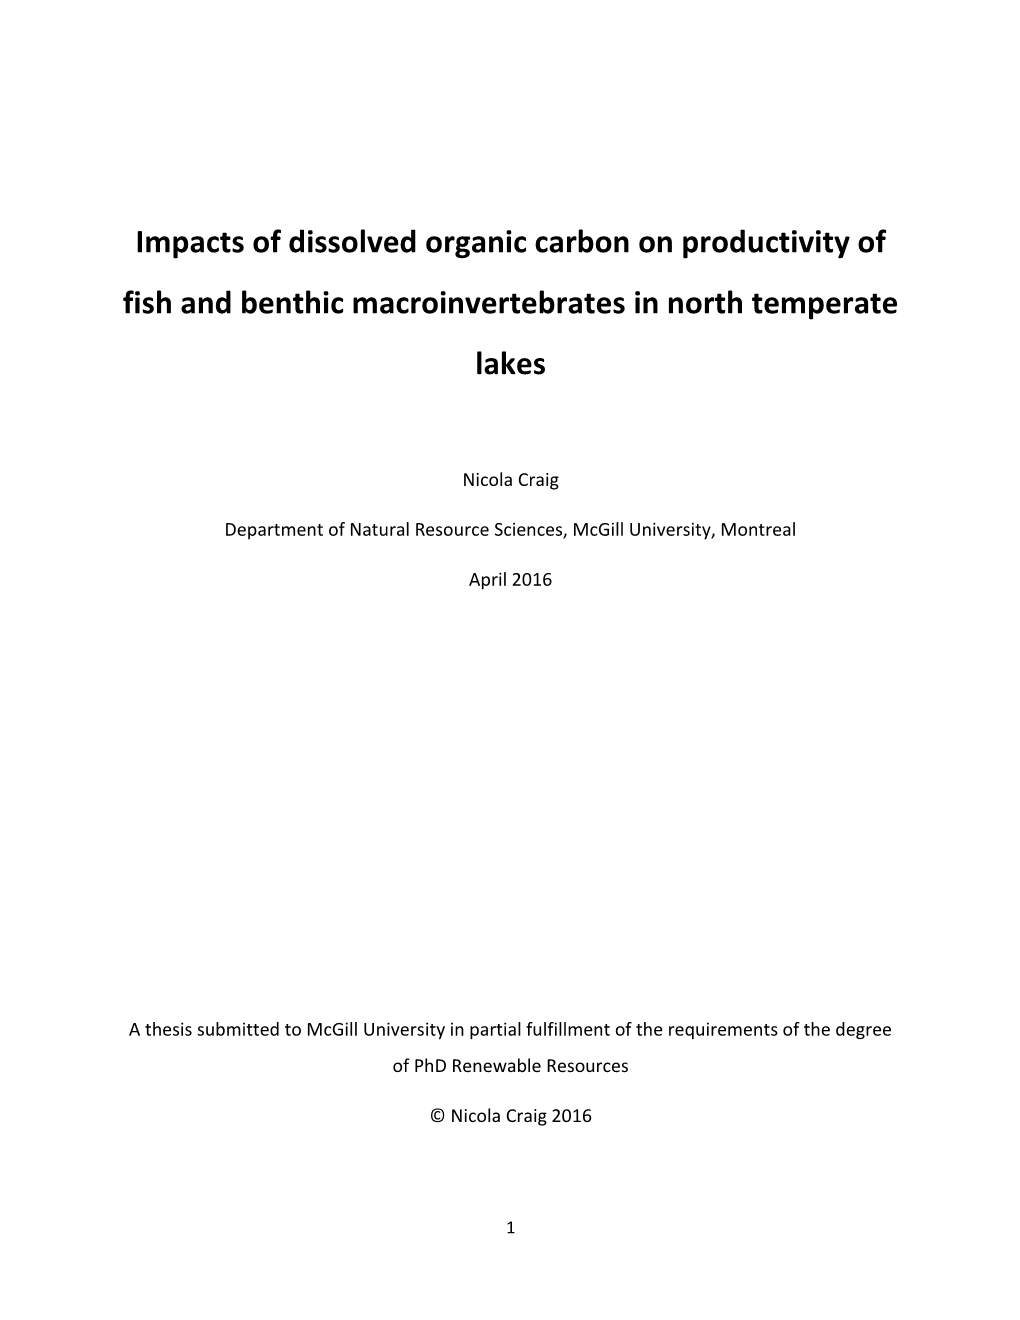 Impacts of Dissolved Organic Carbon on Productivity of Fish and Benthic Macroinvertebrates in North Temperate Lakes